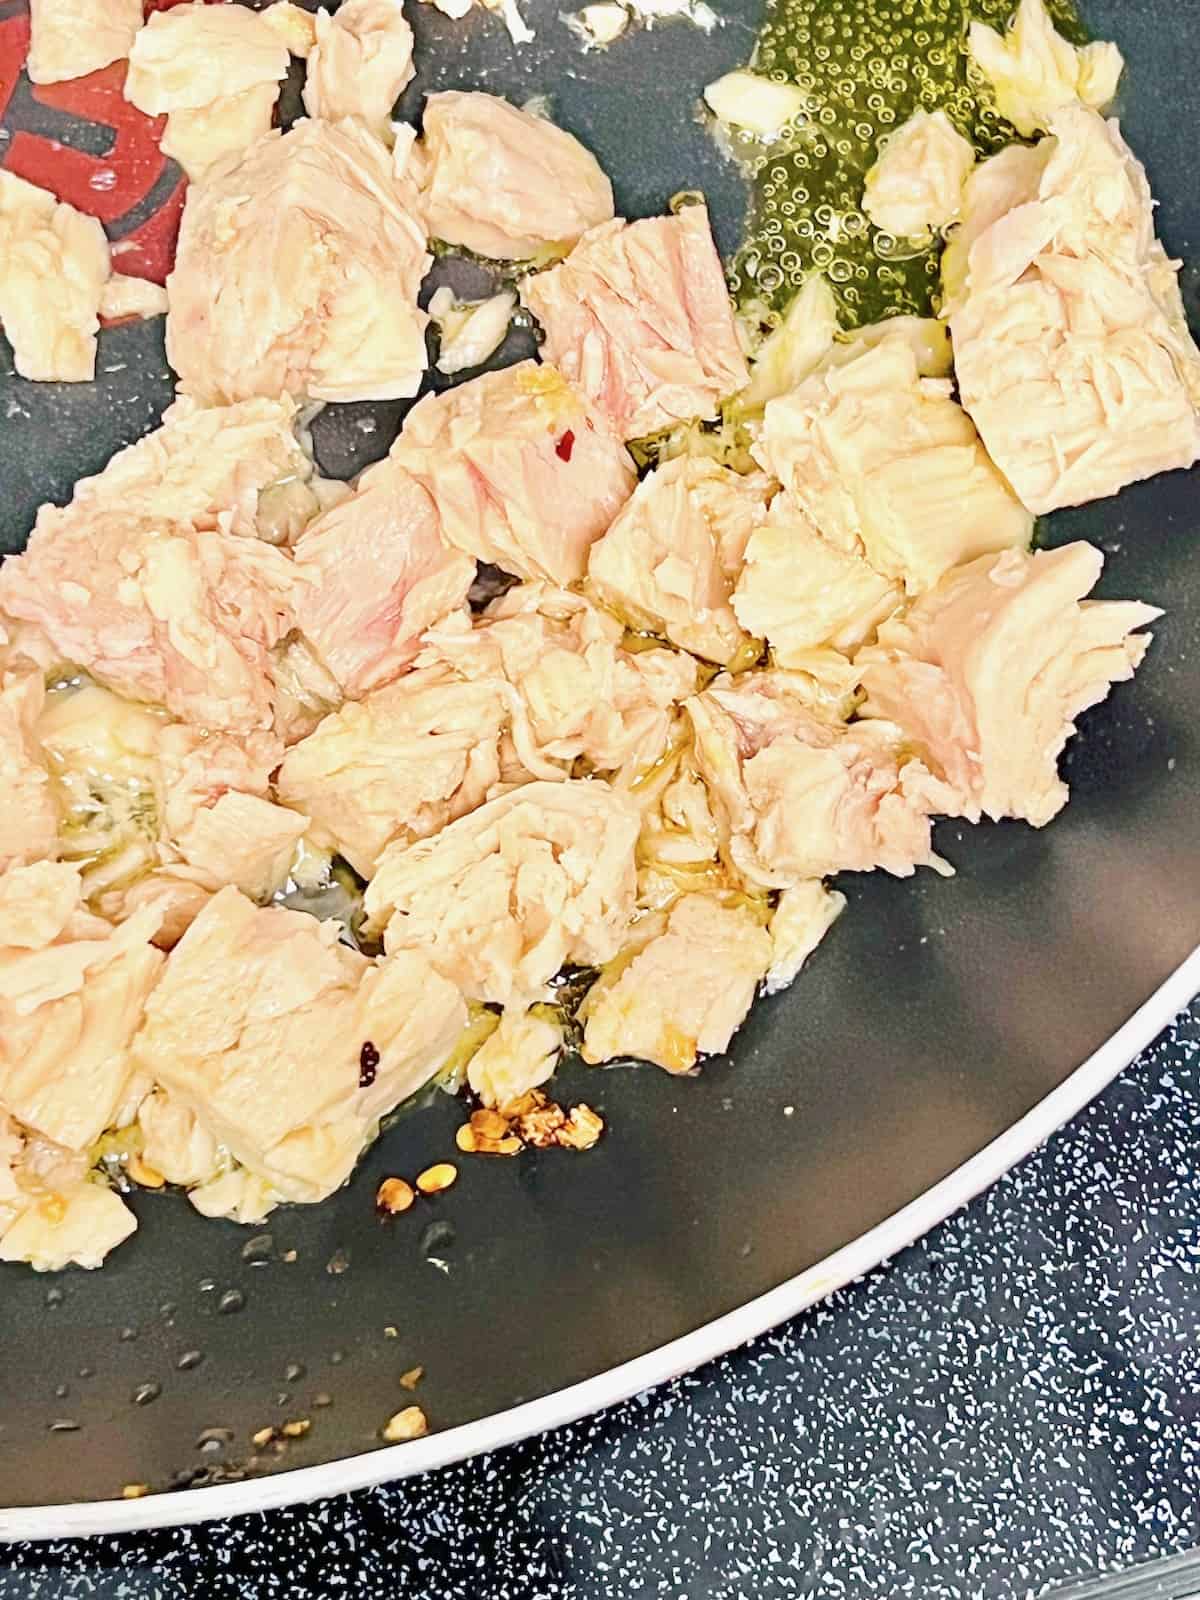 Adding canned tuna to the infused olive oil in a skillet.